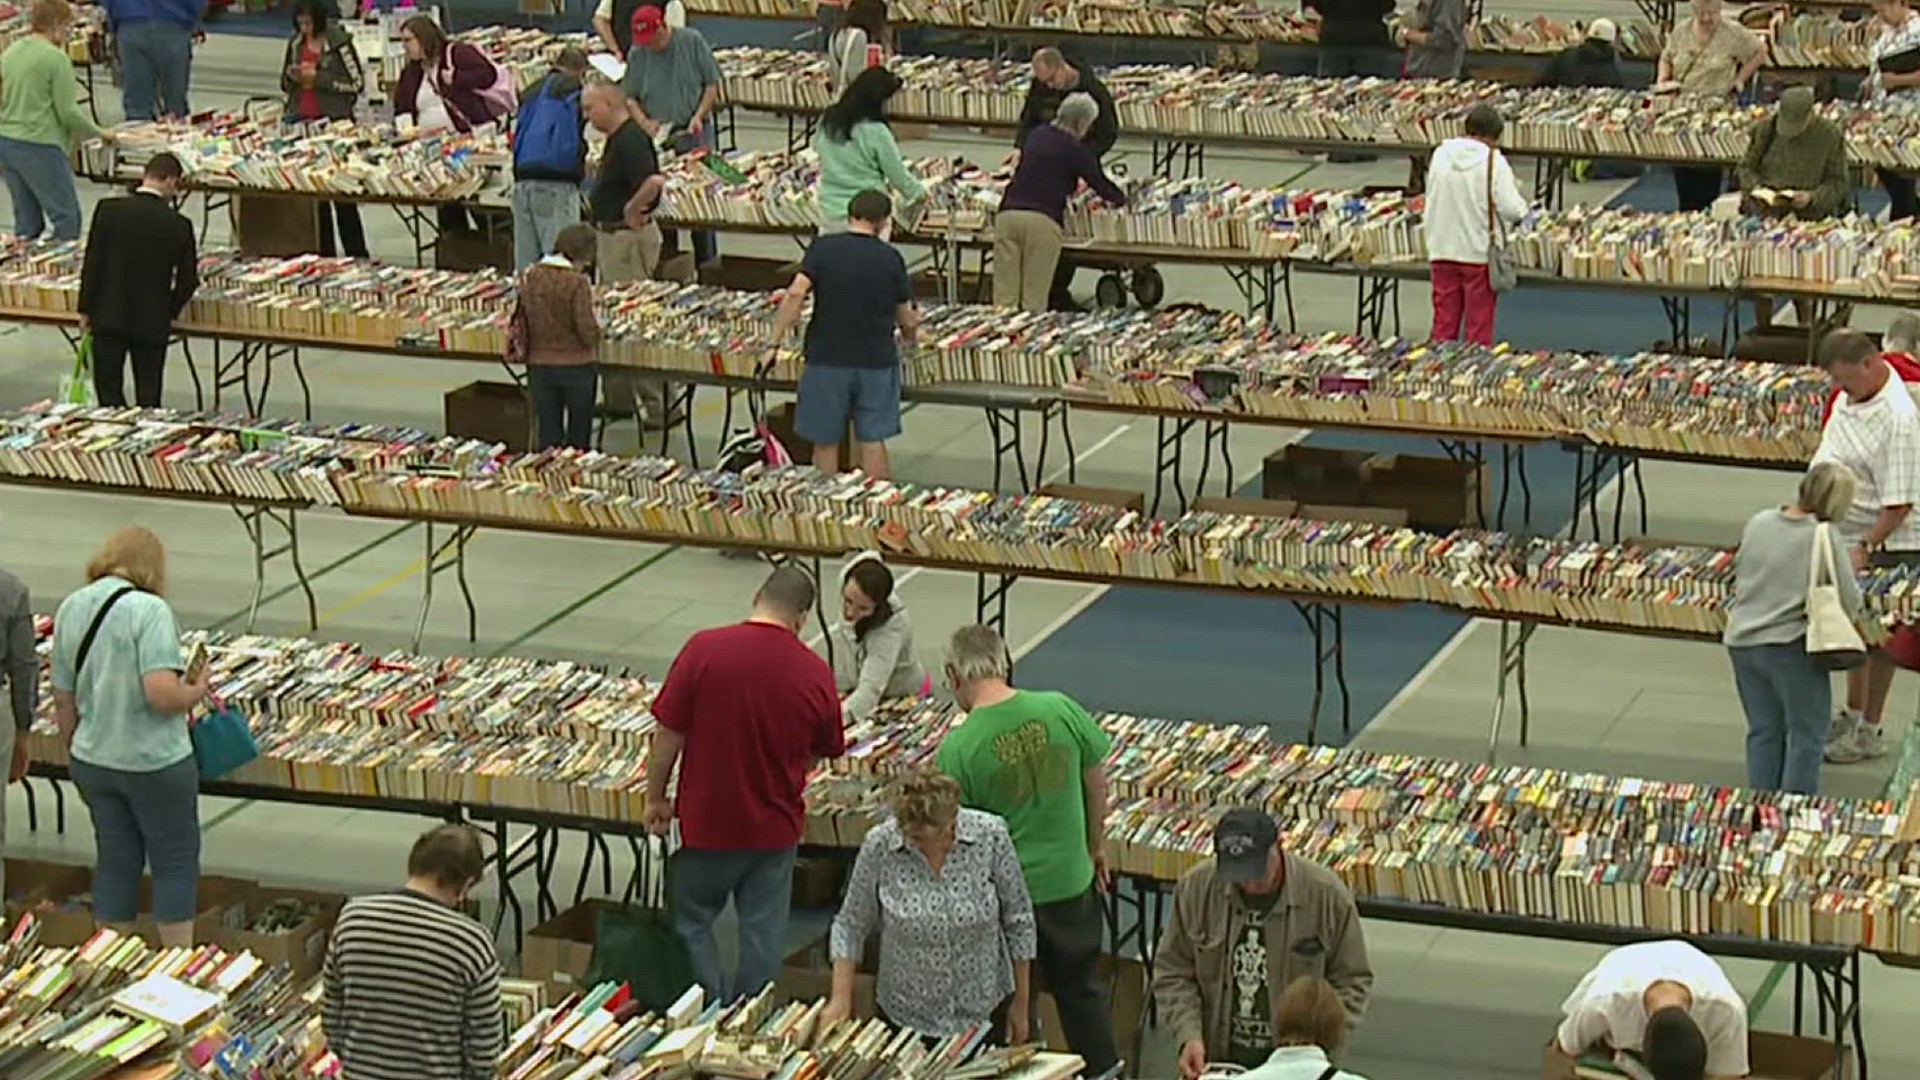 The 68th annual Friends of Lancaster Big Book Sale kicks off today at the Park City Center.